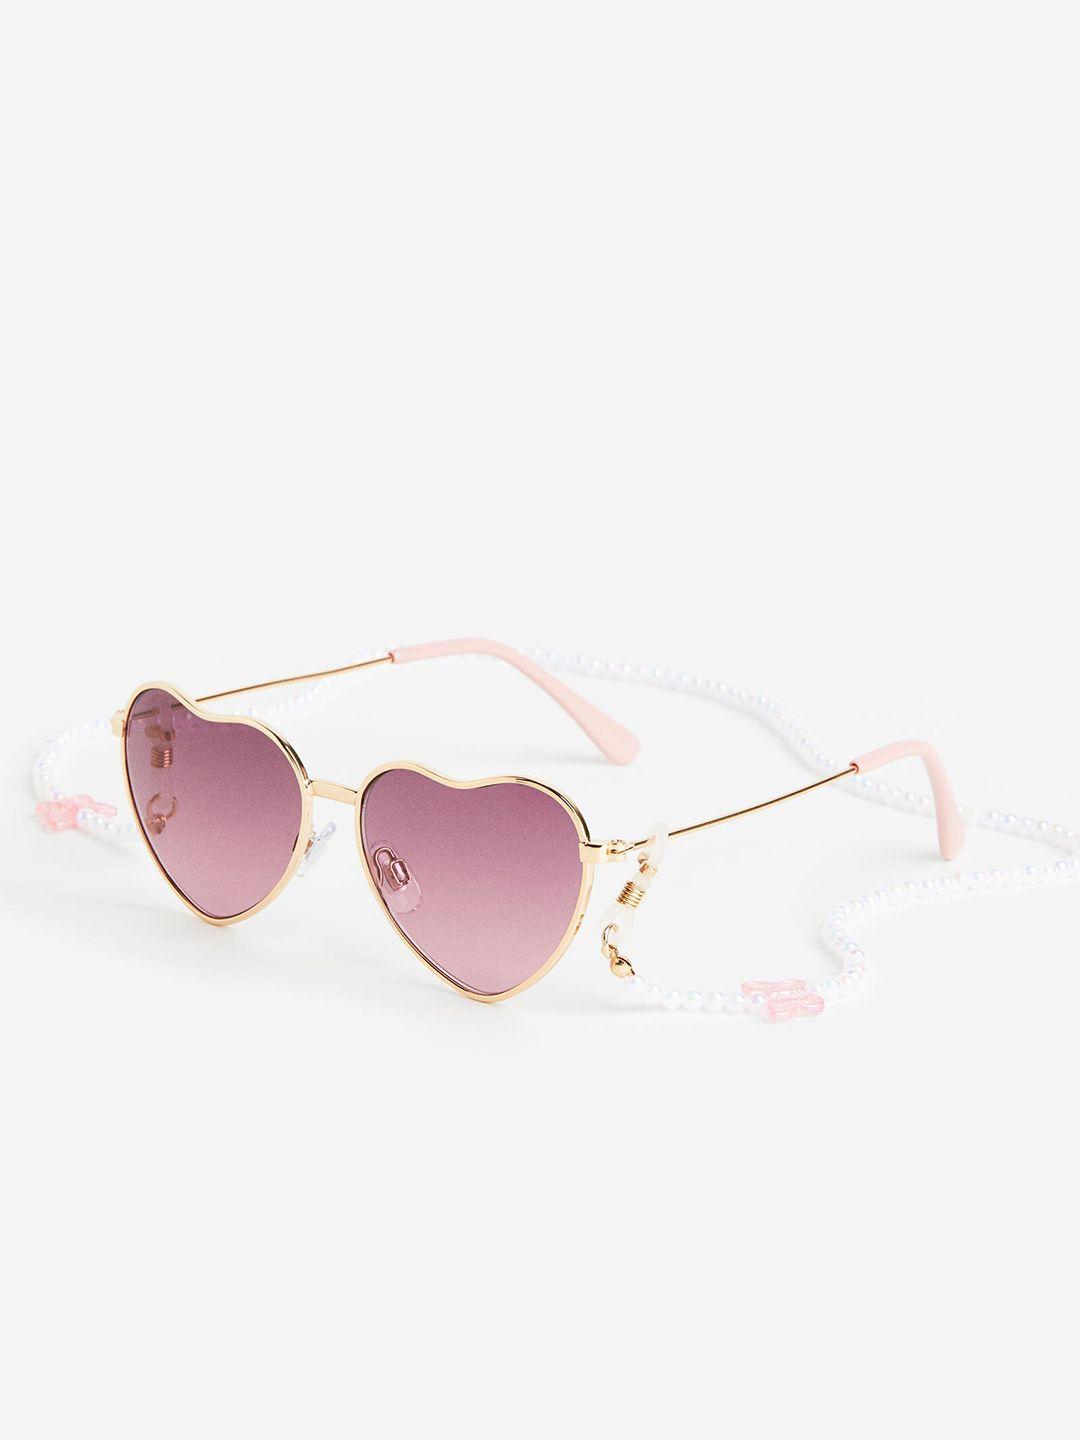 H&M Girls Sunglasses With Glasses Chain